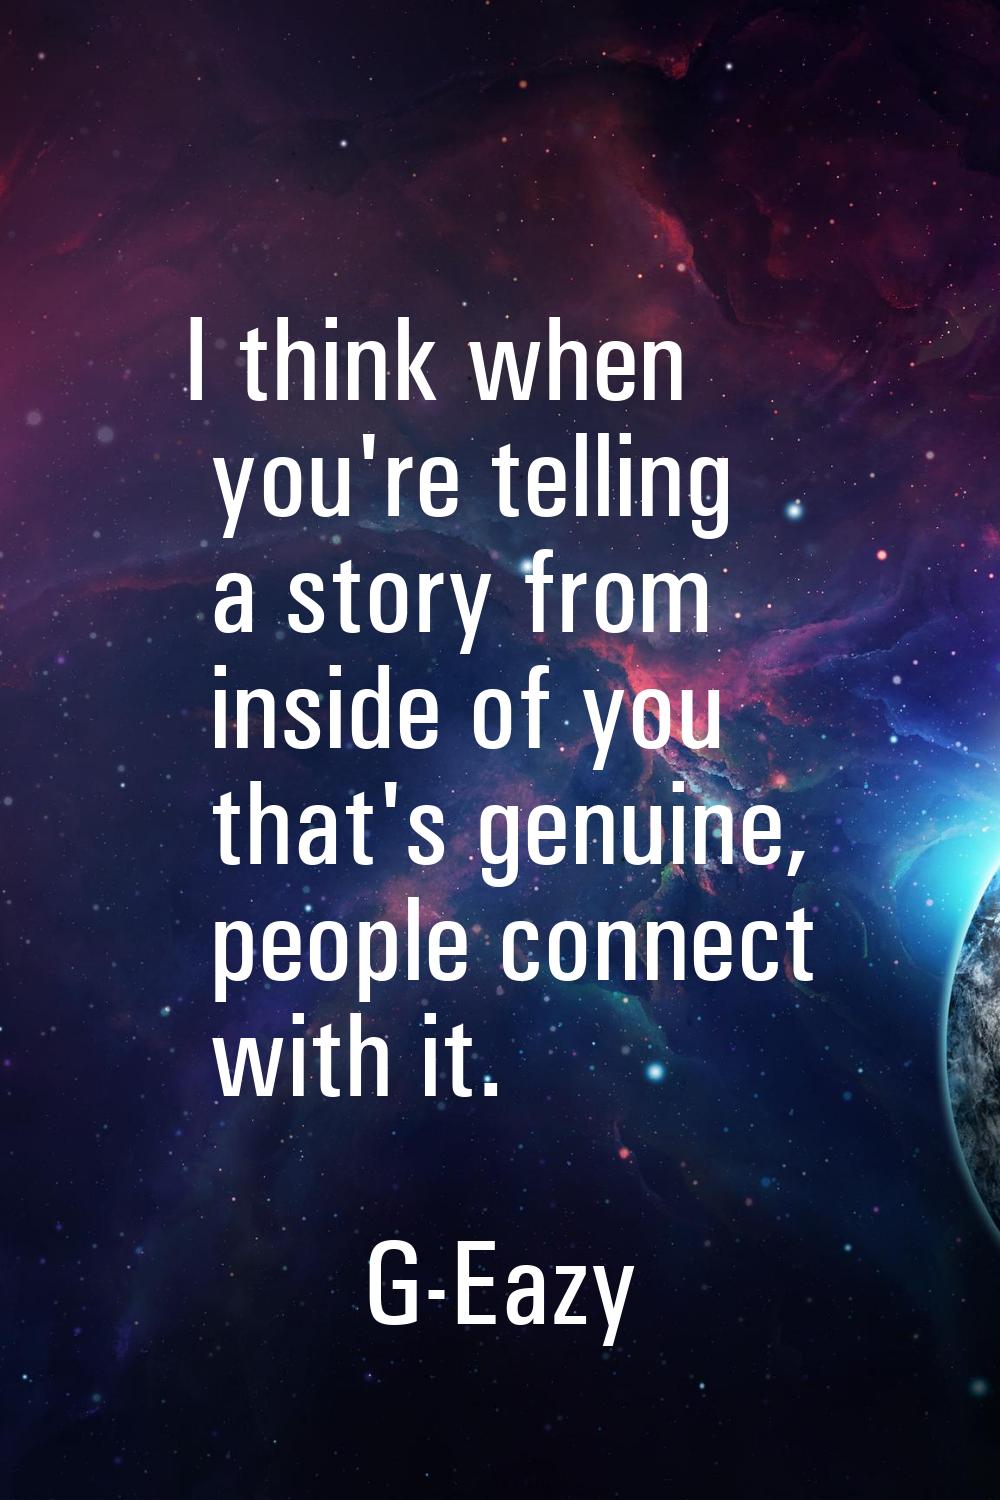 I think when you're telling a story from inside of you that's genuine, people connect with it.